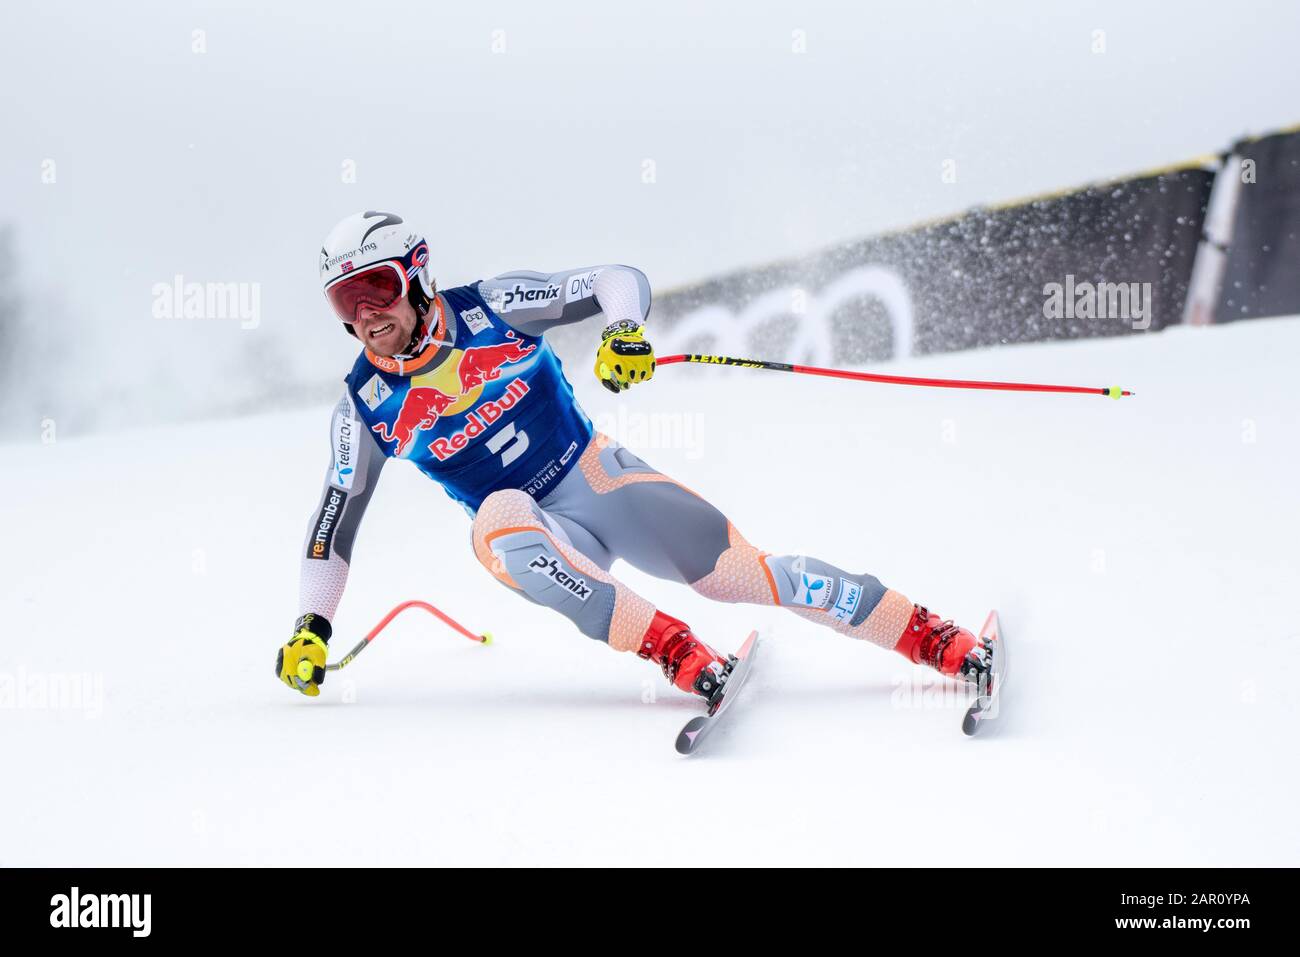 Aleksander Aamodt Kilde of Norway at the Ski Alpin: 80. Hahnenkamm Race 2020 - Audi FIS Alpine Ski World Cup - Men's Downhill at the Streif on January 25, 2020 in Kitzbuehel, AUSTRIA. Credit: European Sports Photographic Agency/Alamy Live News Stock Photo